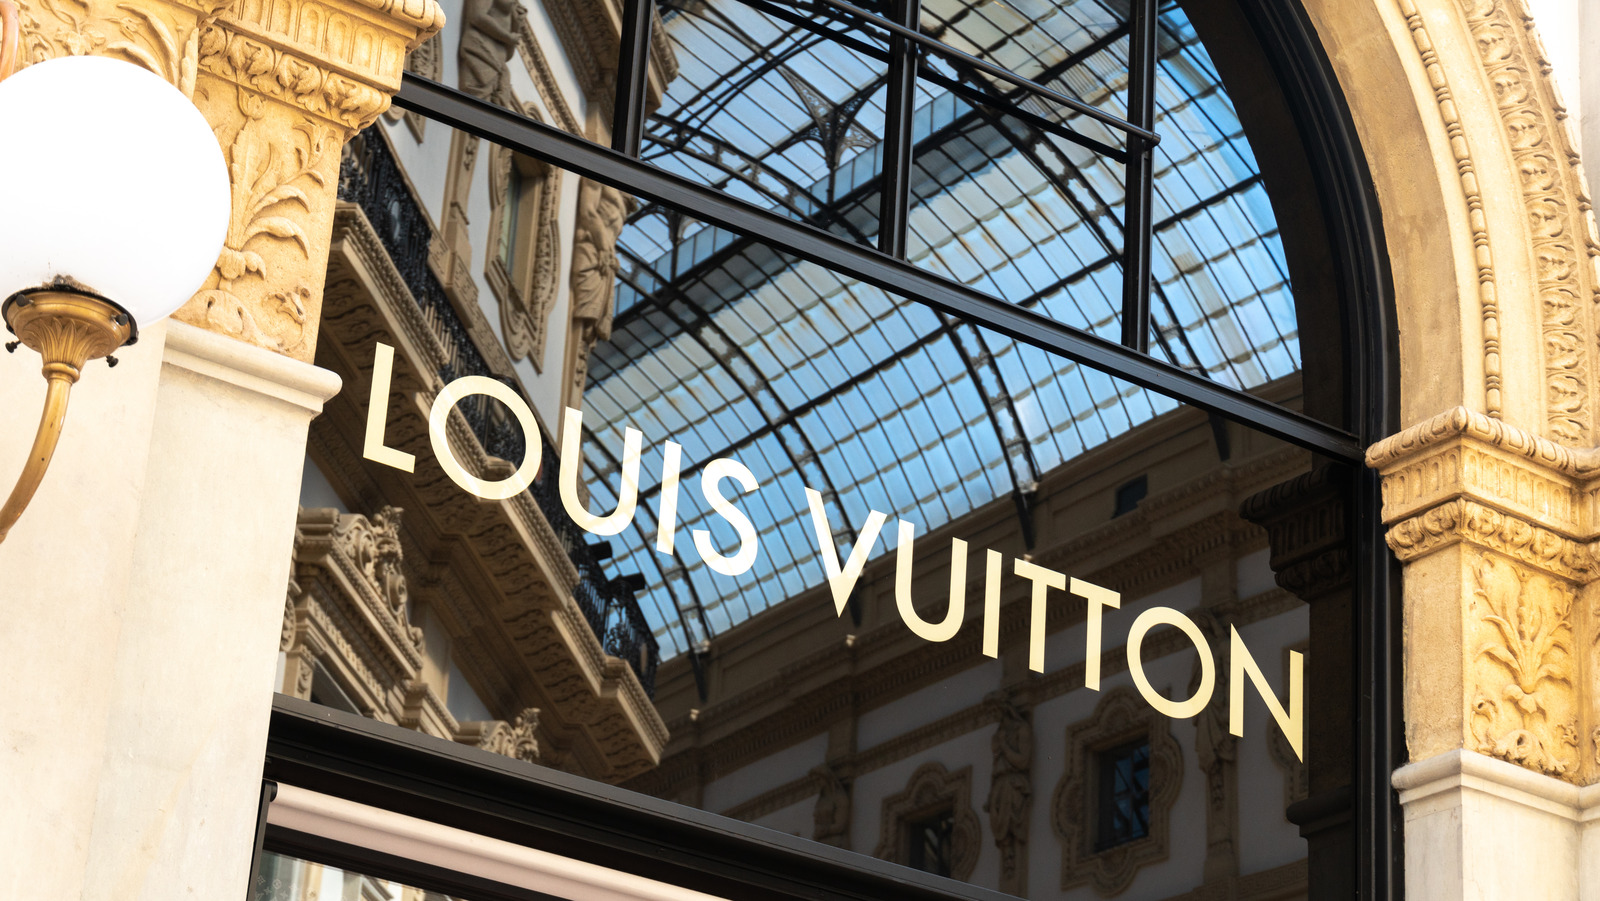 Don't like what you see? Louis Vuitton's AW19 collection courted controversy